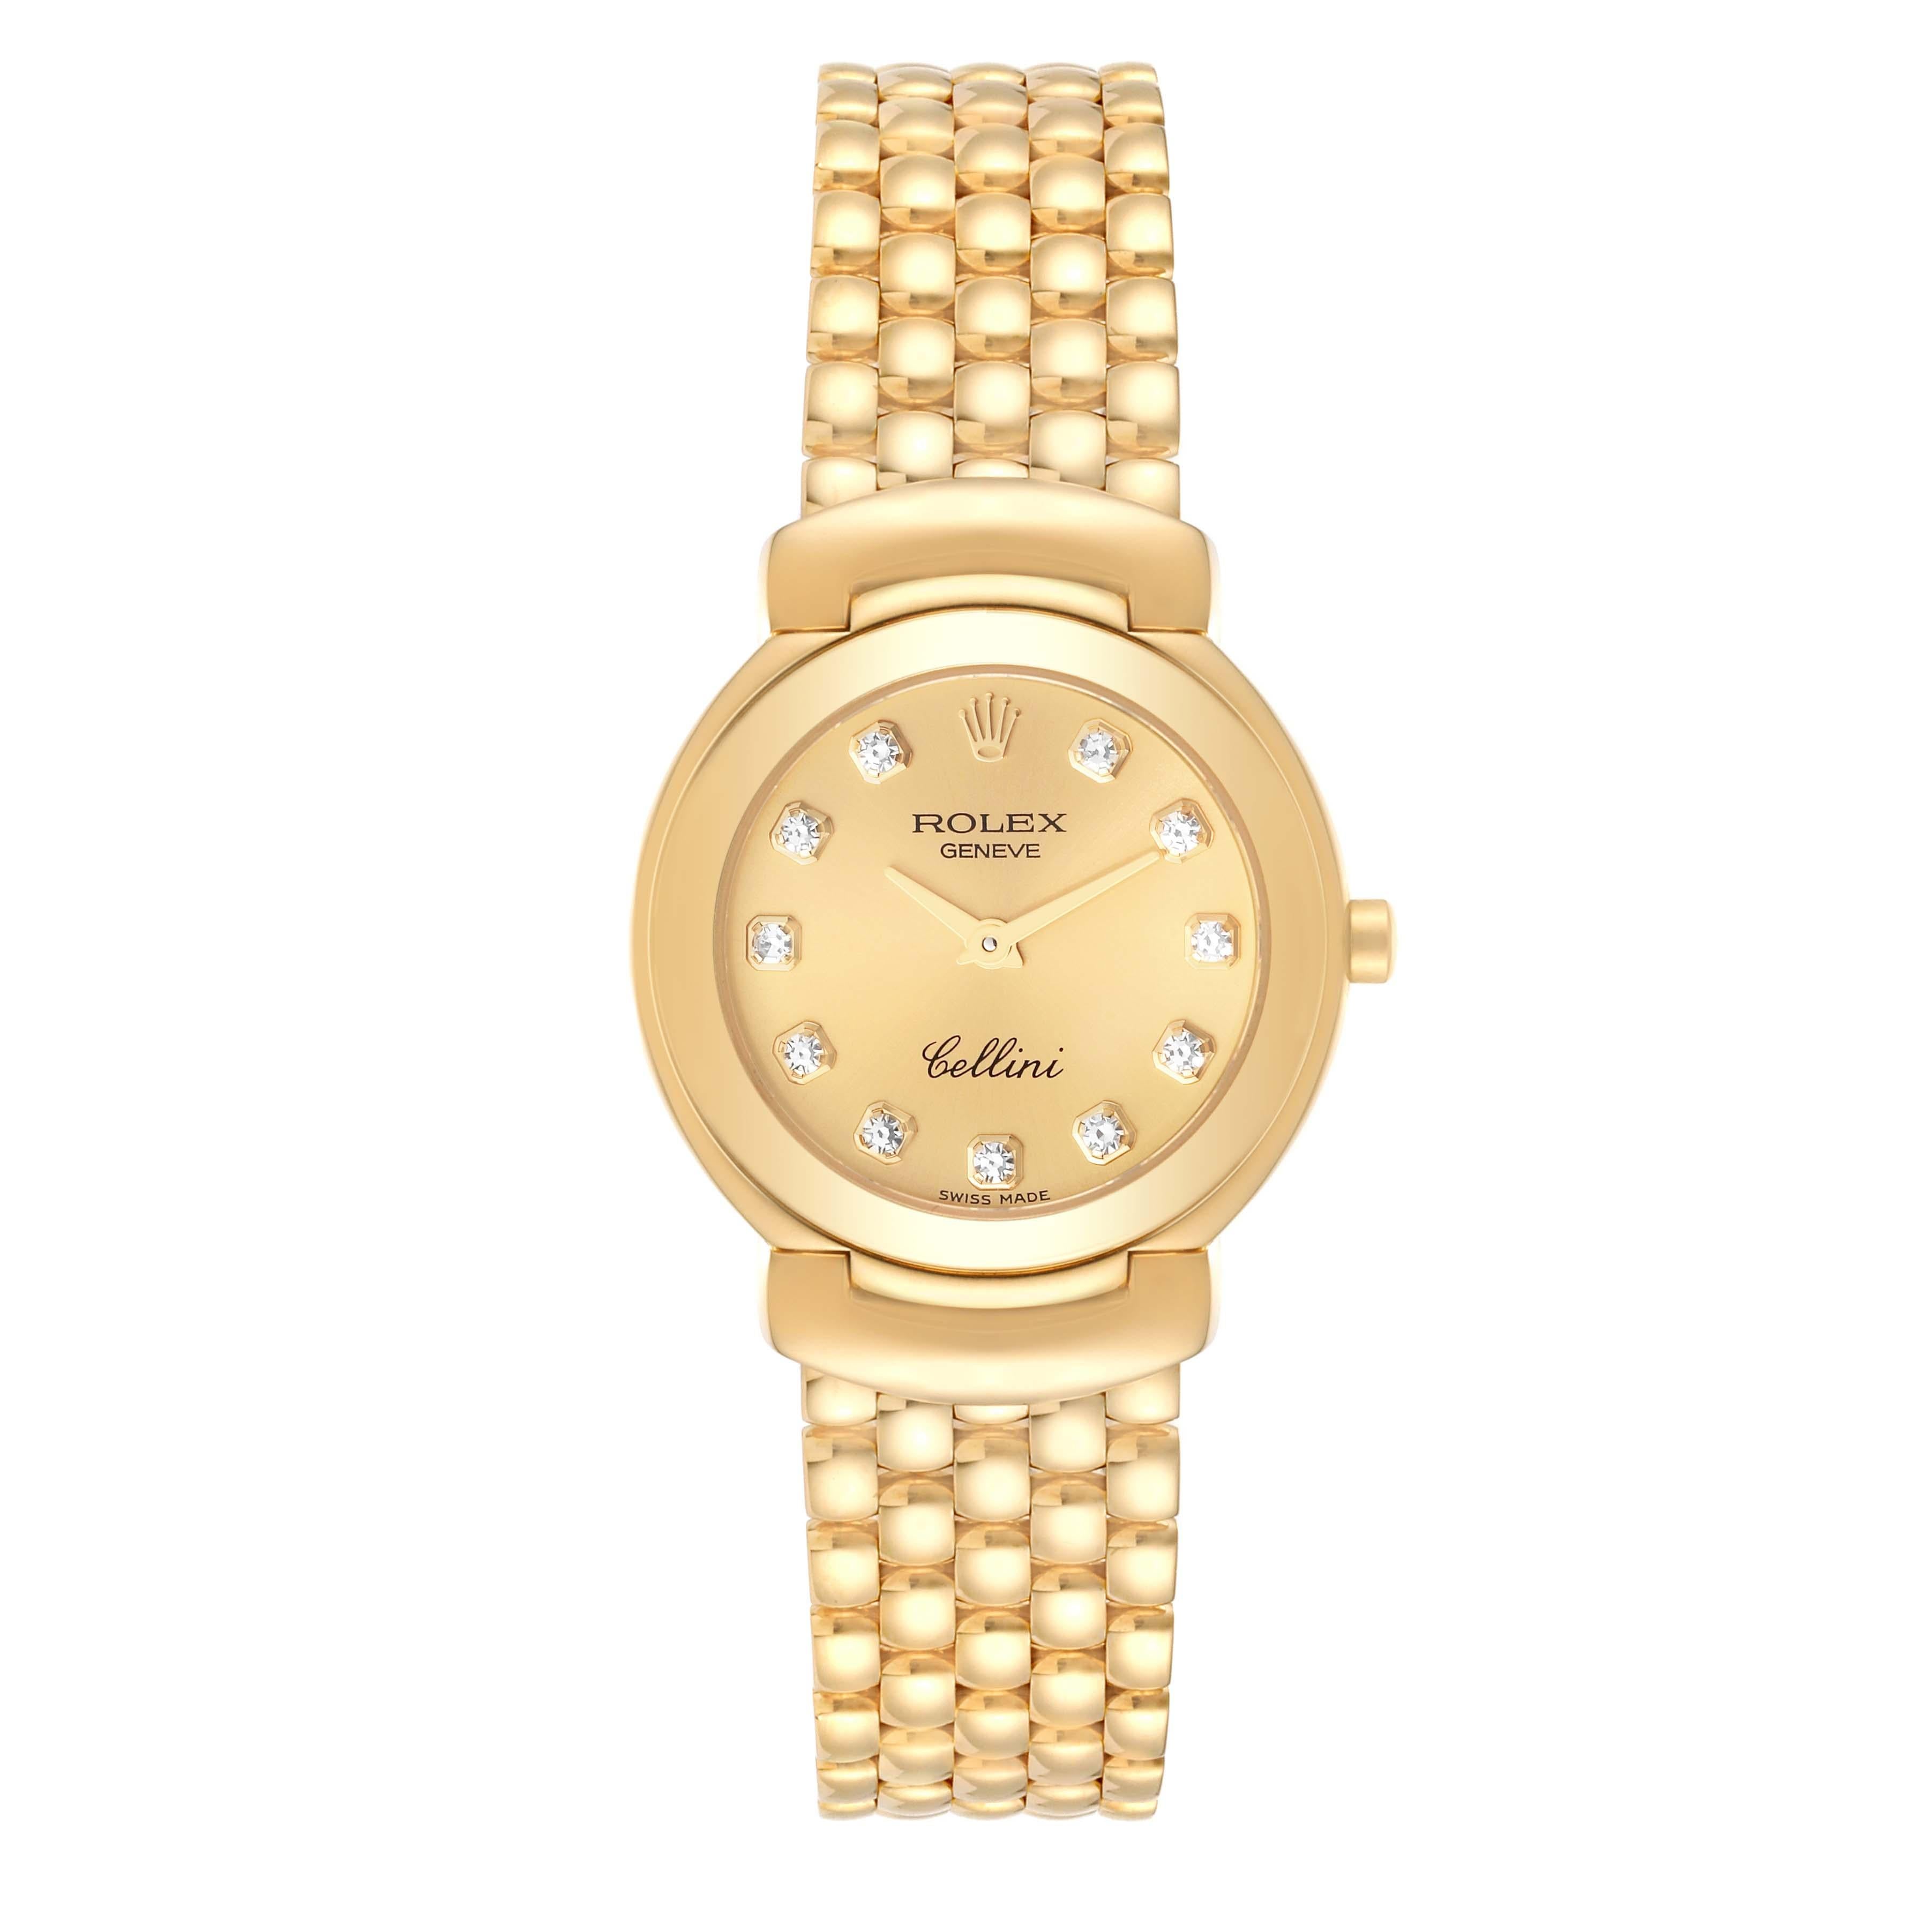 Rolex Cellini Yellow Gold Champagne Diamond Dial Ladies Watch 6621. Quartz movement. 18k yellow gold case 26.0 mm. Rolex logo on the crown. . Scratch resistant sapphire crystal. Champagne dial with original Rolex factory diamond hour markers. 18k